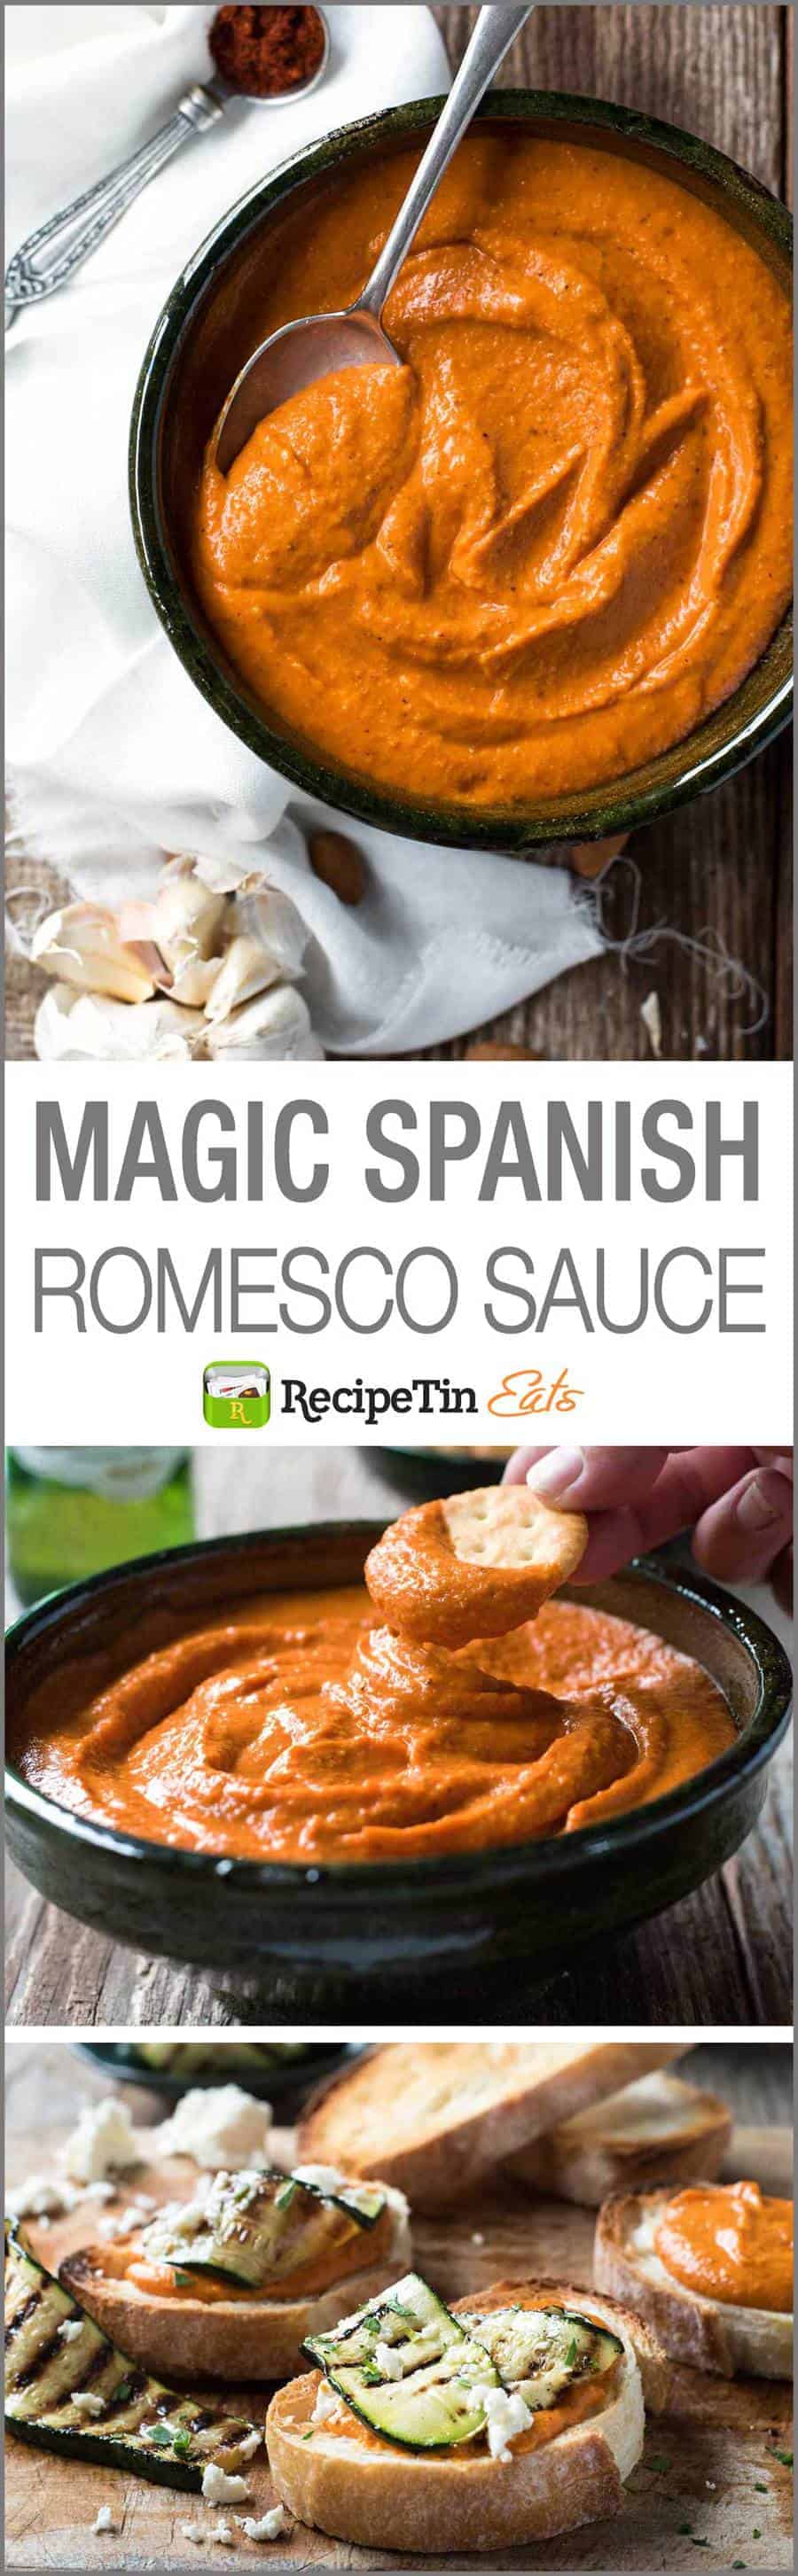 Magic Spanish Romesco Sauce - This miracle sauce is simple to make and fabulous to use as a dip, sauce, spread, pesto, as a marinade or even to flavour and thicken soups!